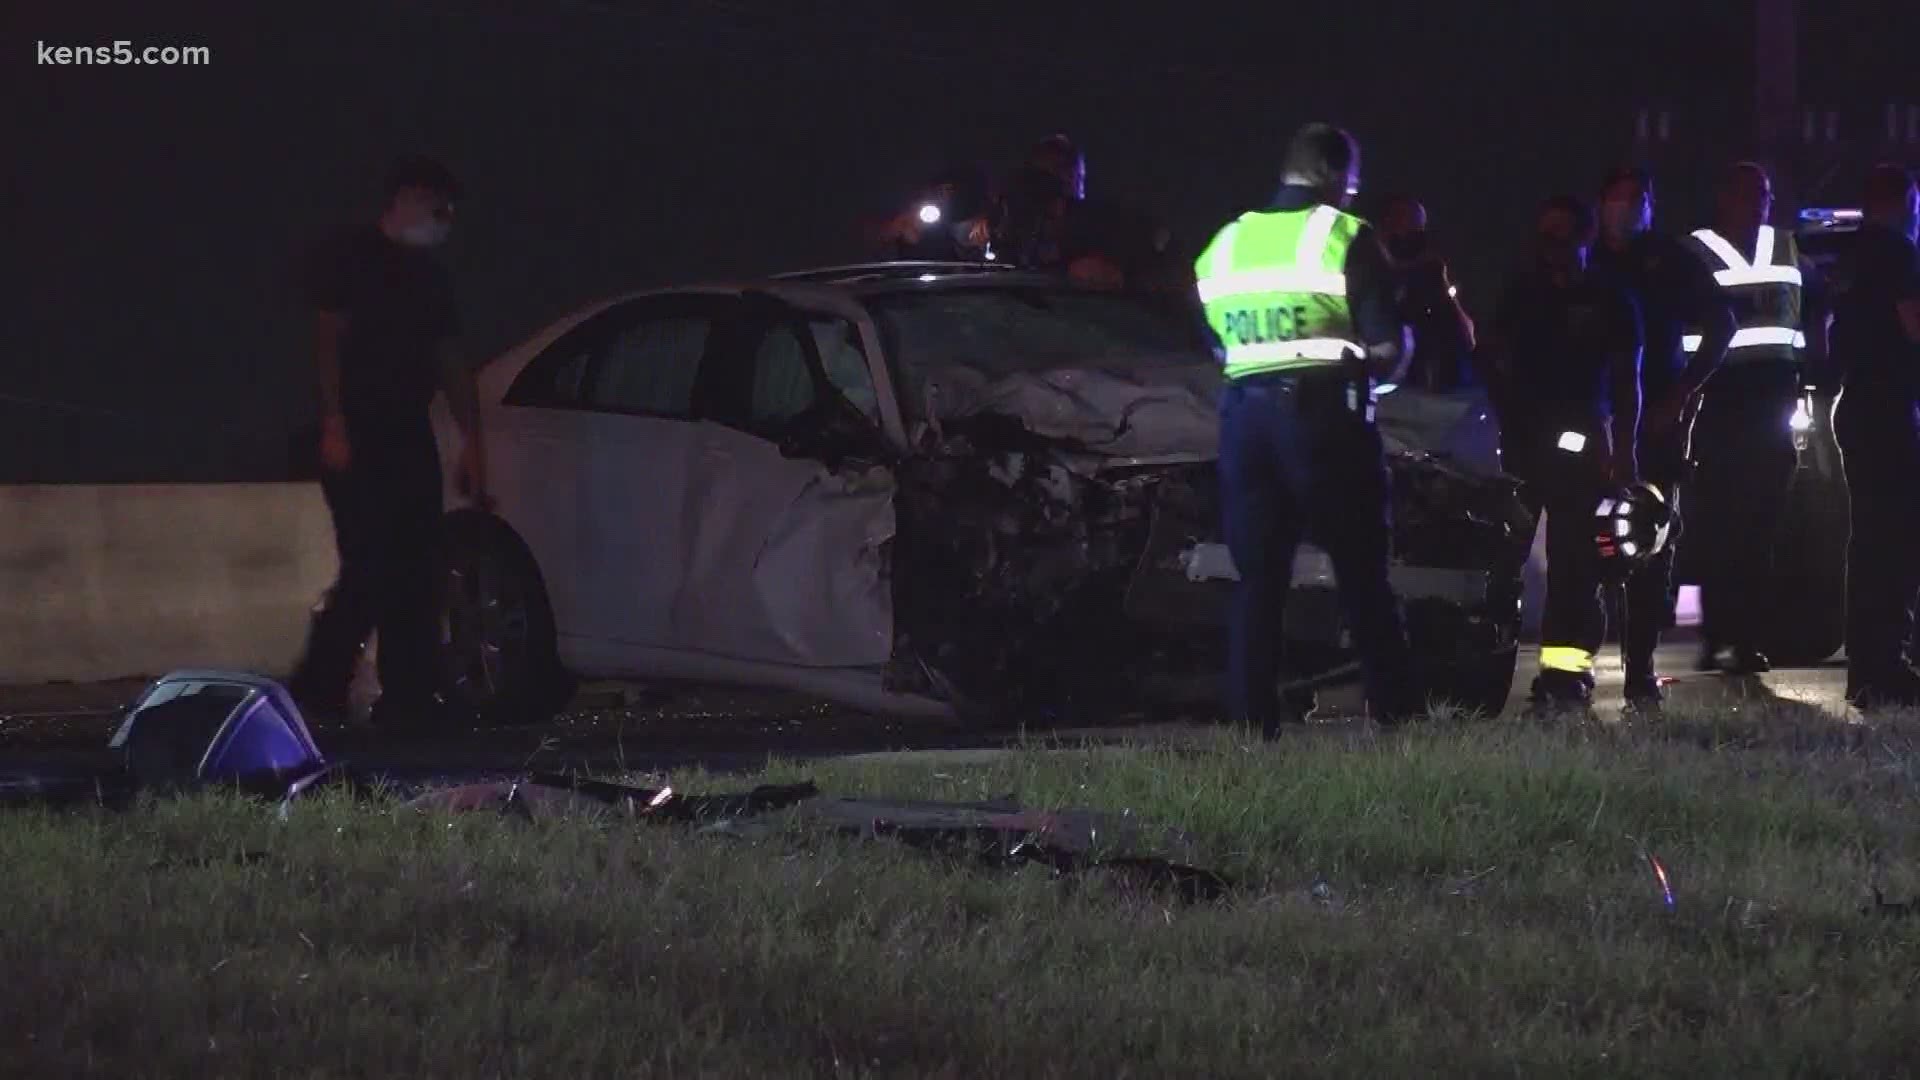 Drunk driving remains a paramount issue in San Antonio. On the first night of bars reopening, a fatal road accident is believed to have involved a drunk driver.